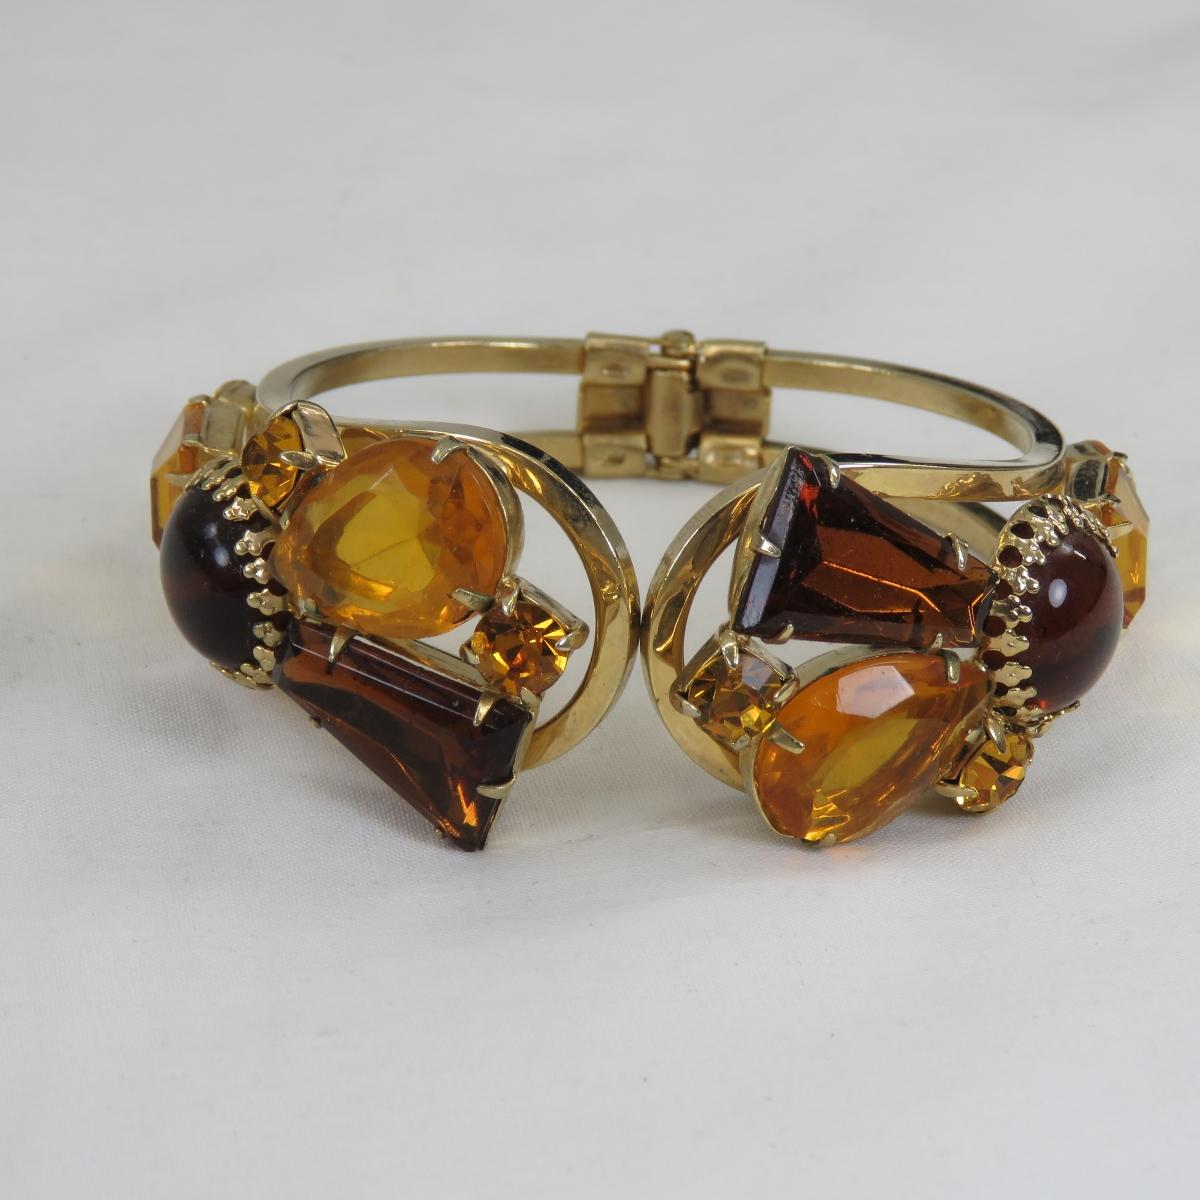 Vintage Coro & Other Topaz Colored Stone Jewelry